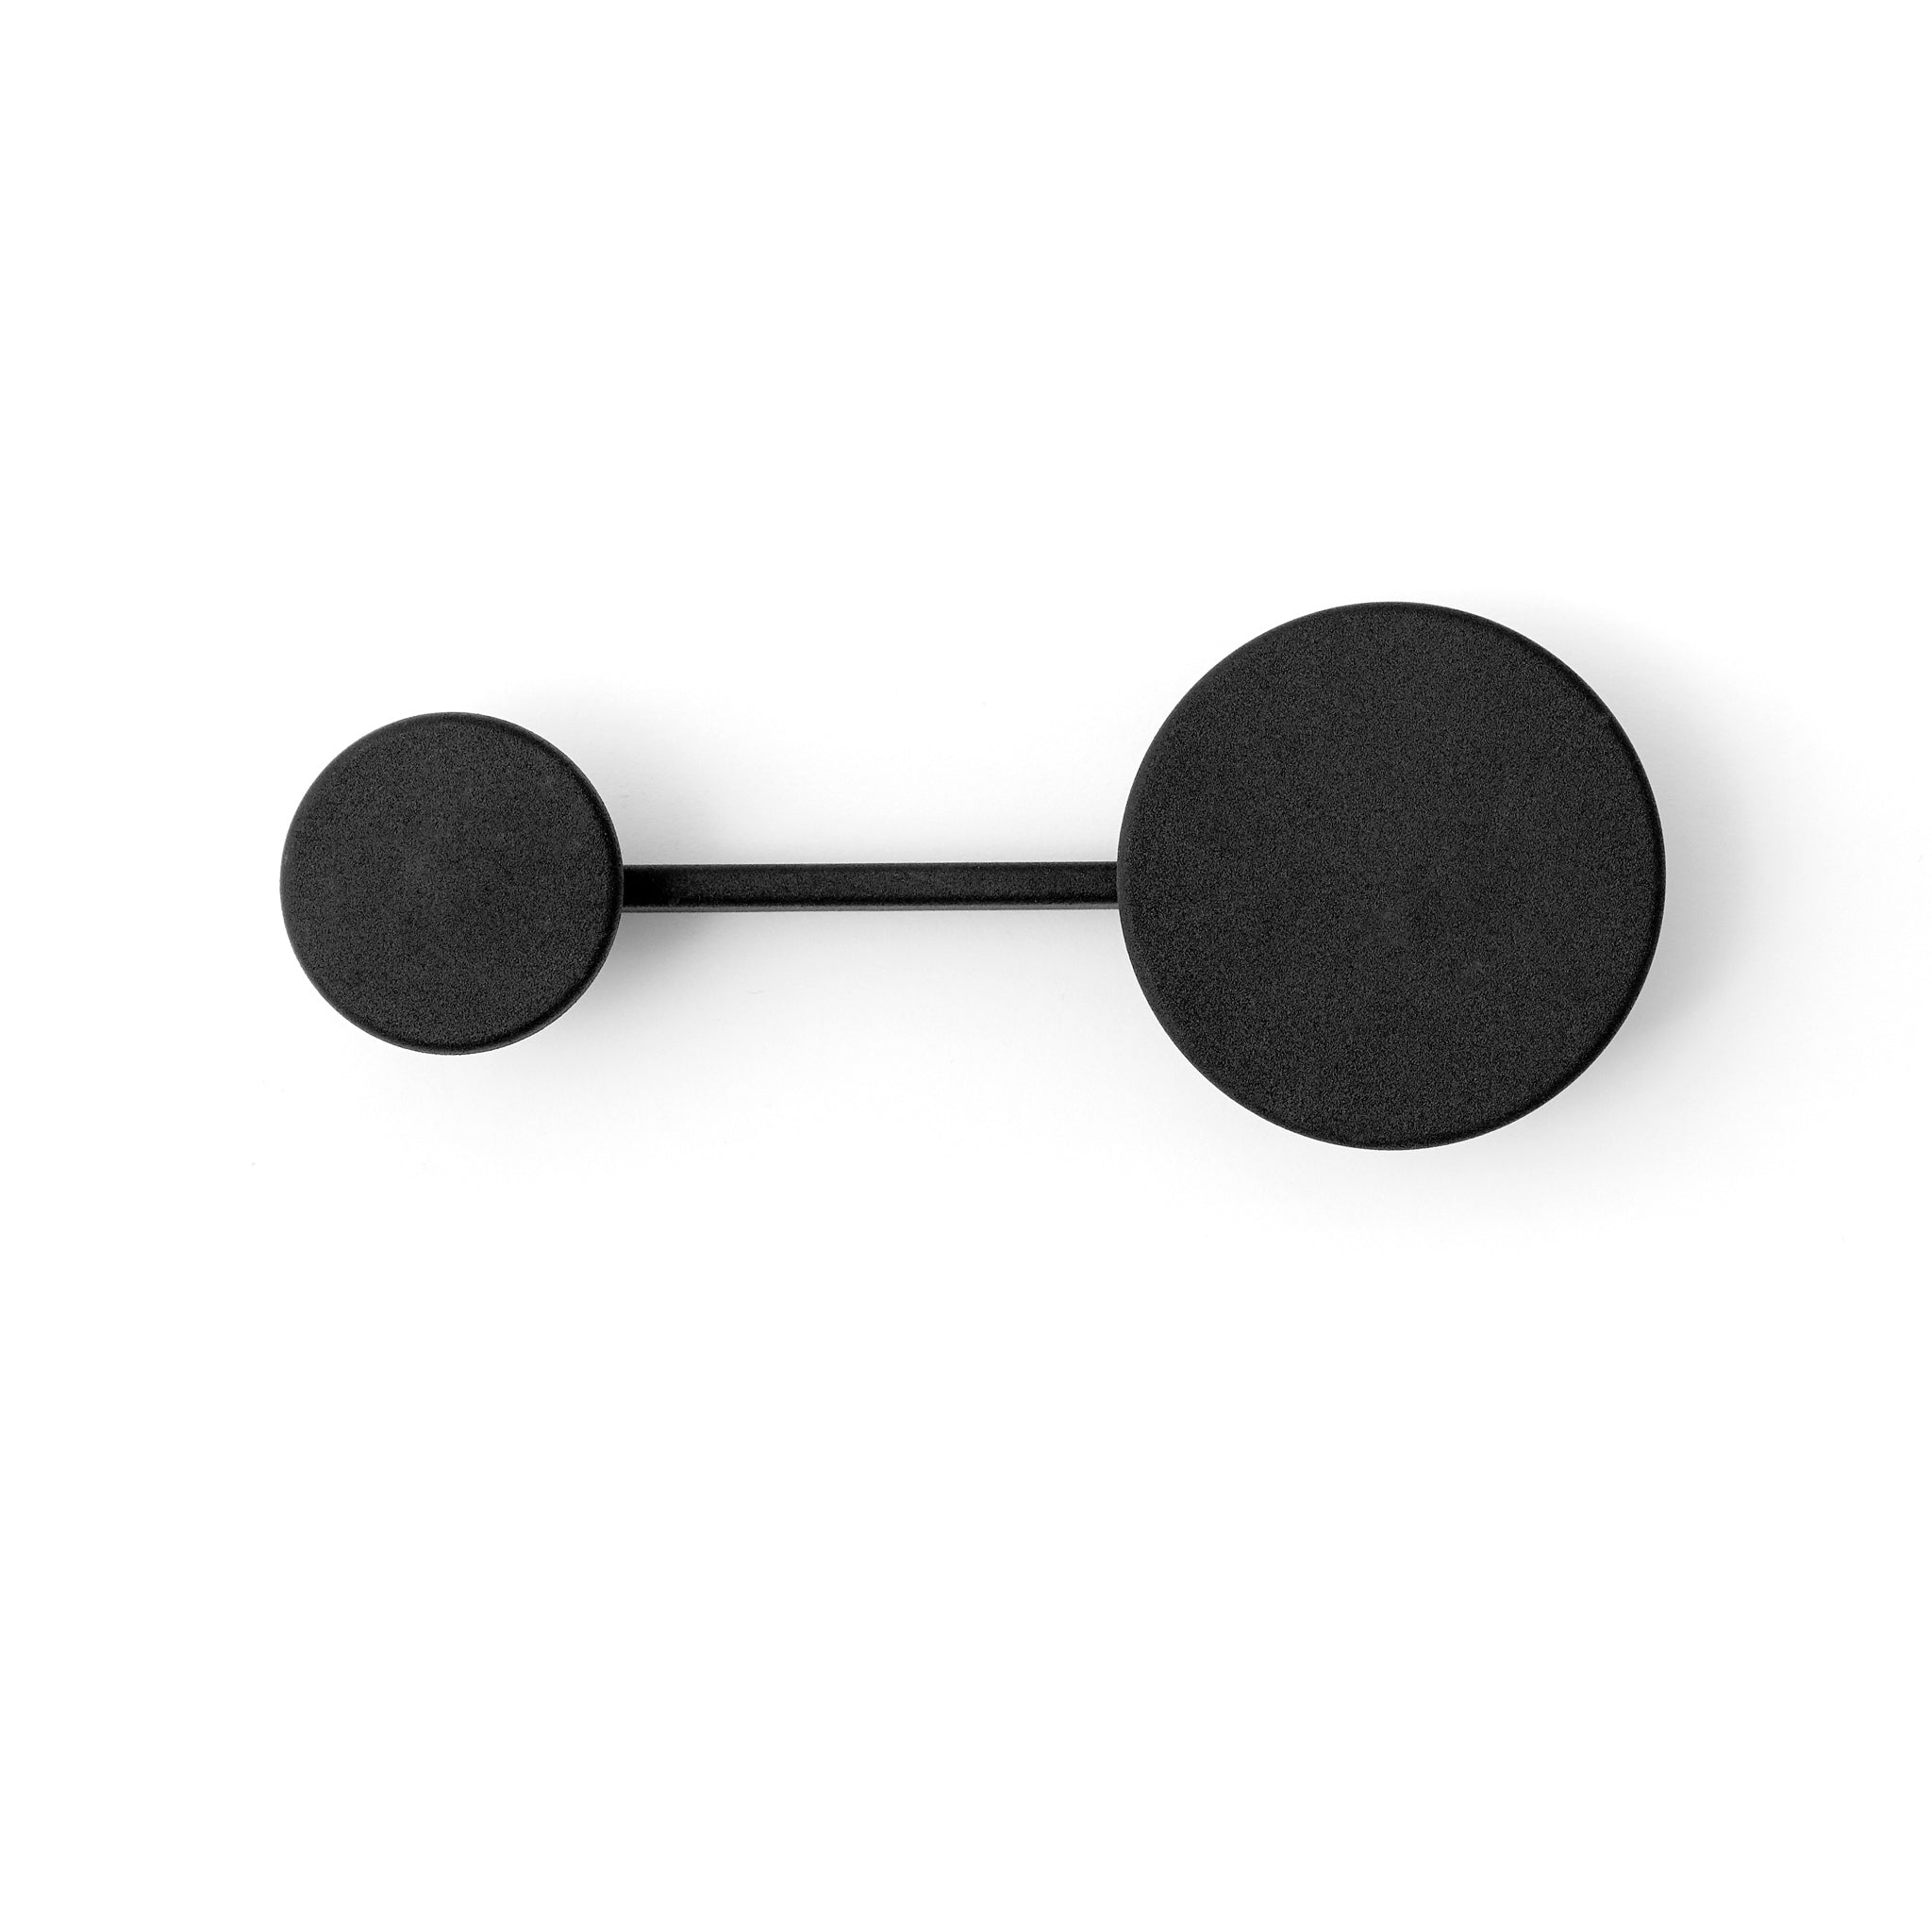 Afteroom Coat Hanger - Small by Afteroom